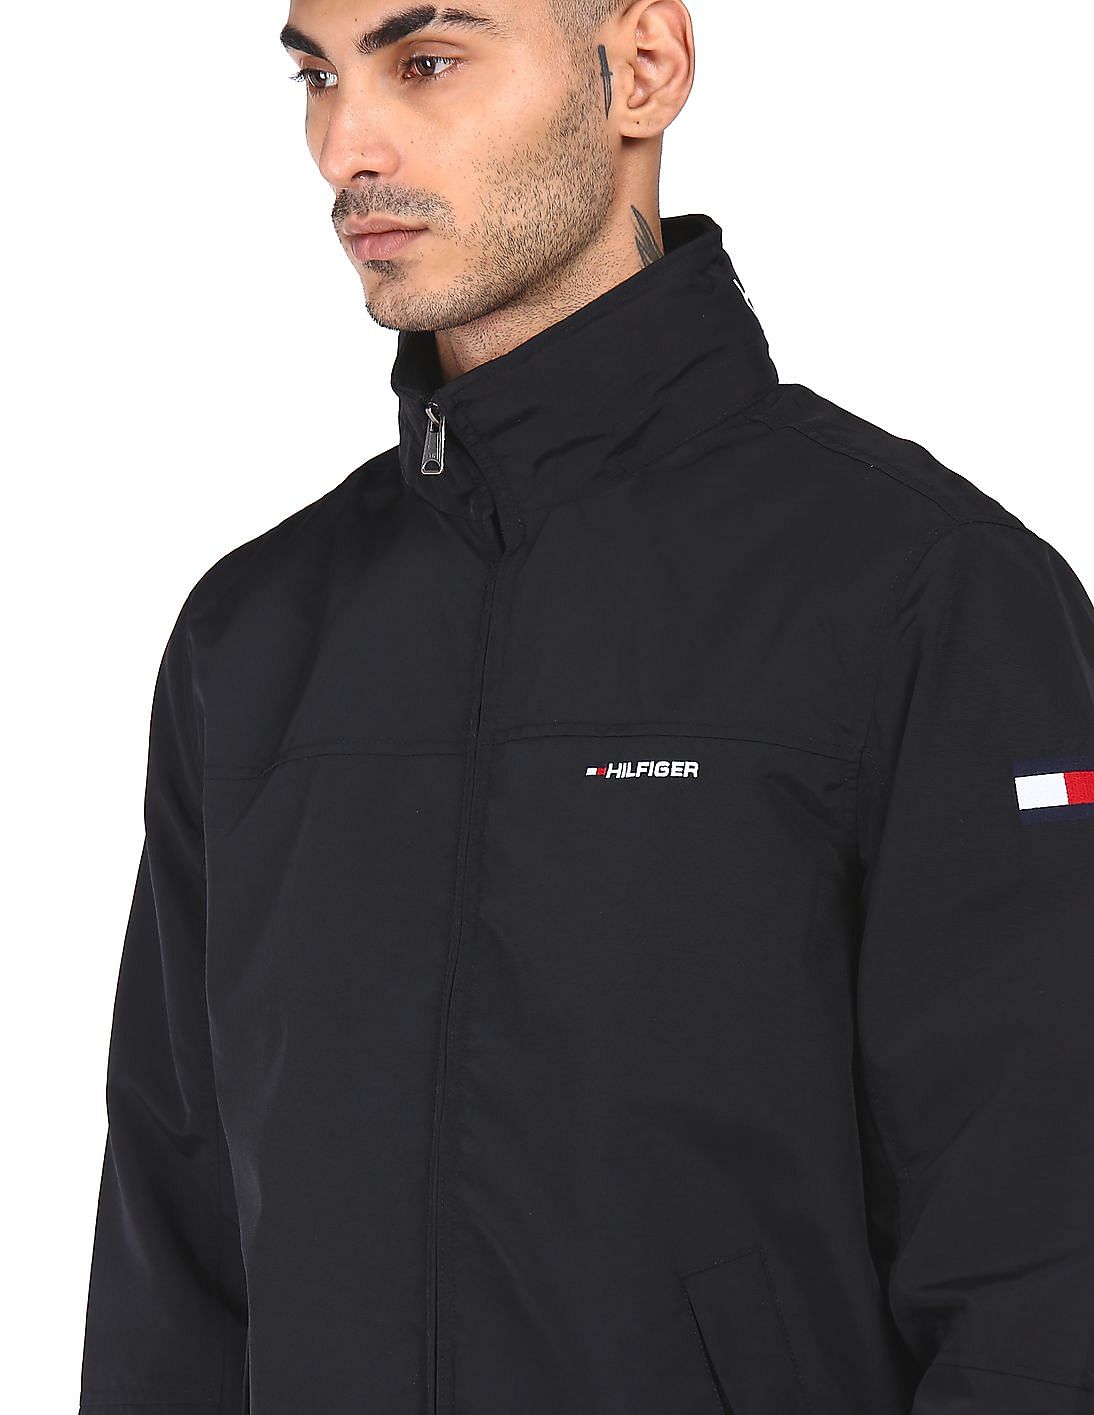 on time enter submarine Buy Tommy Hilfiger Men Black Stand Collar Woven Solid Bomber Jacket -  NNNOW.com